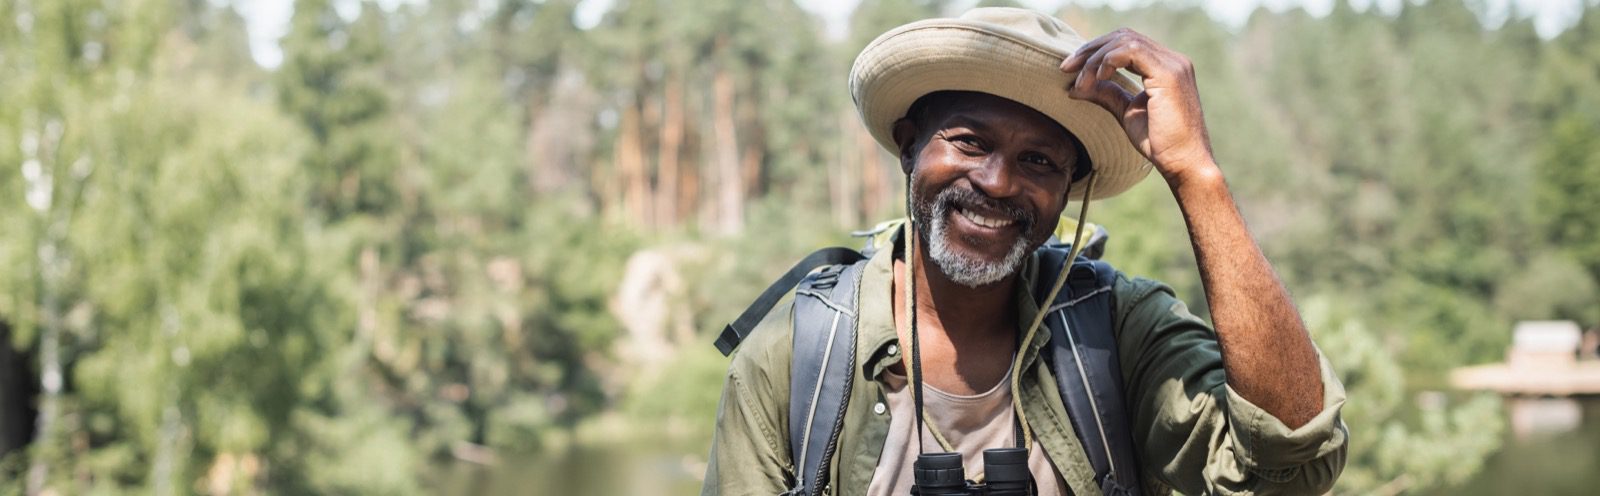 Smiling african american tourist with hat and binoculars looking at camera outdoors, banner,stock image